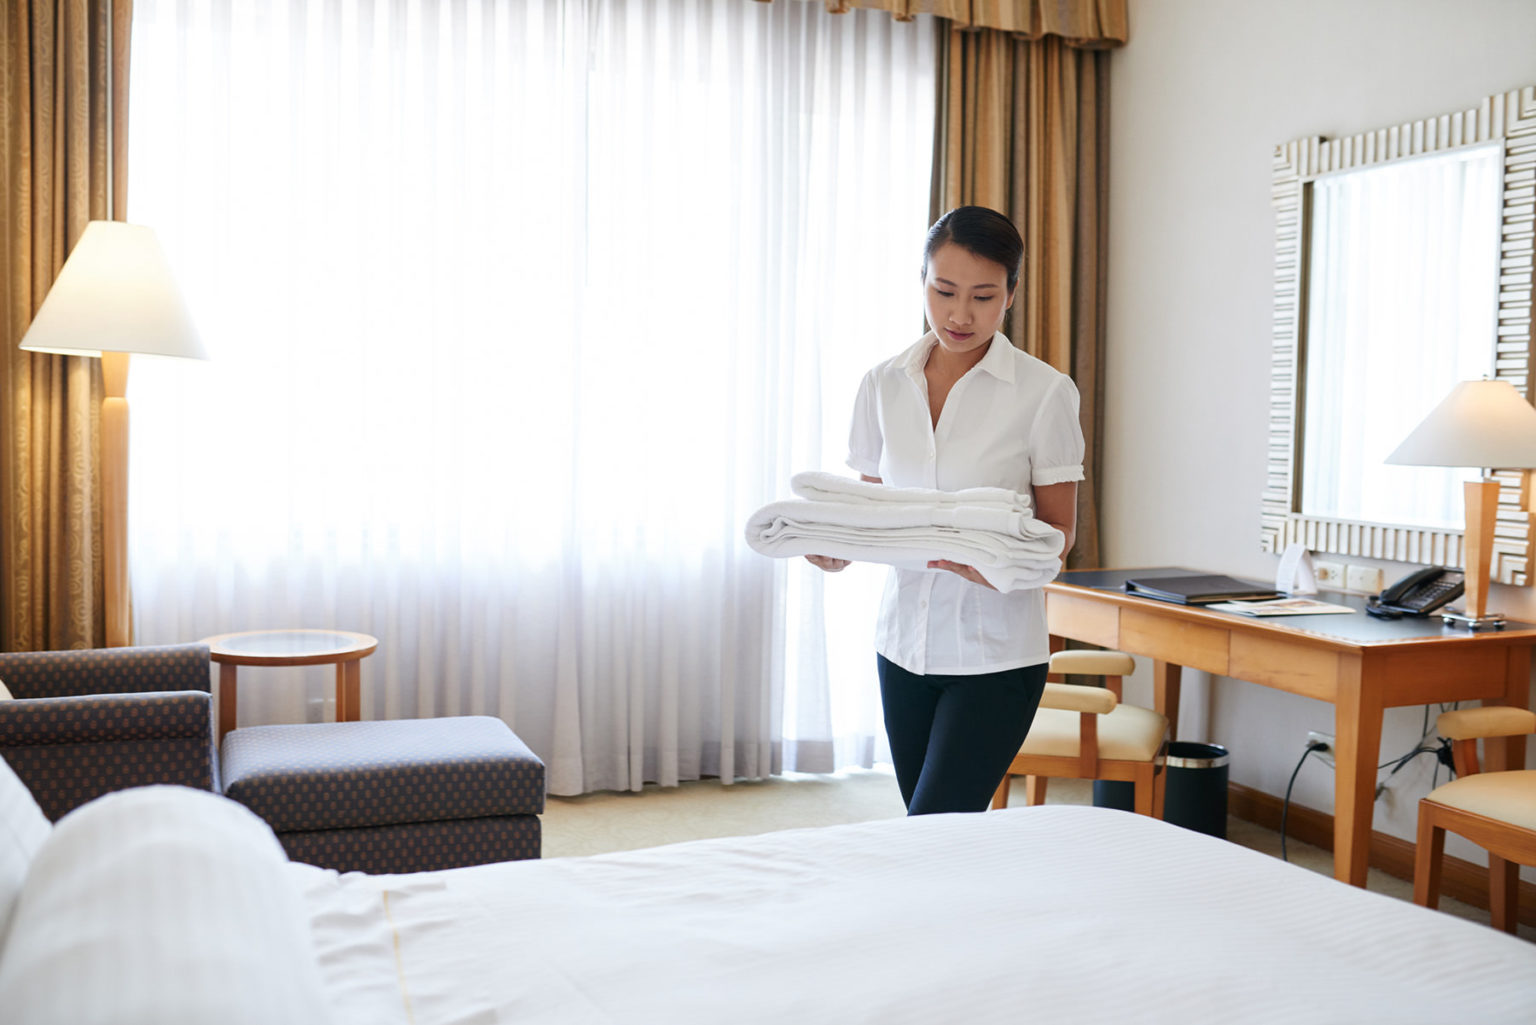 A female hotel maid brings towels into a hotel room